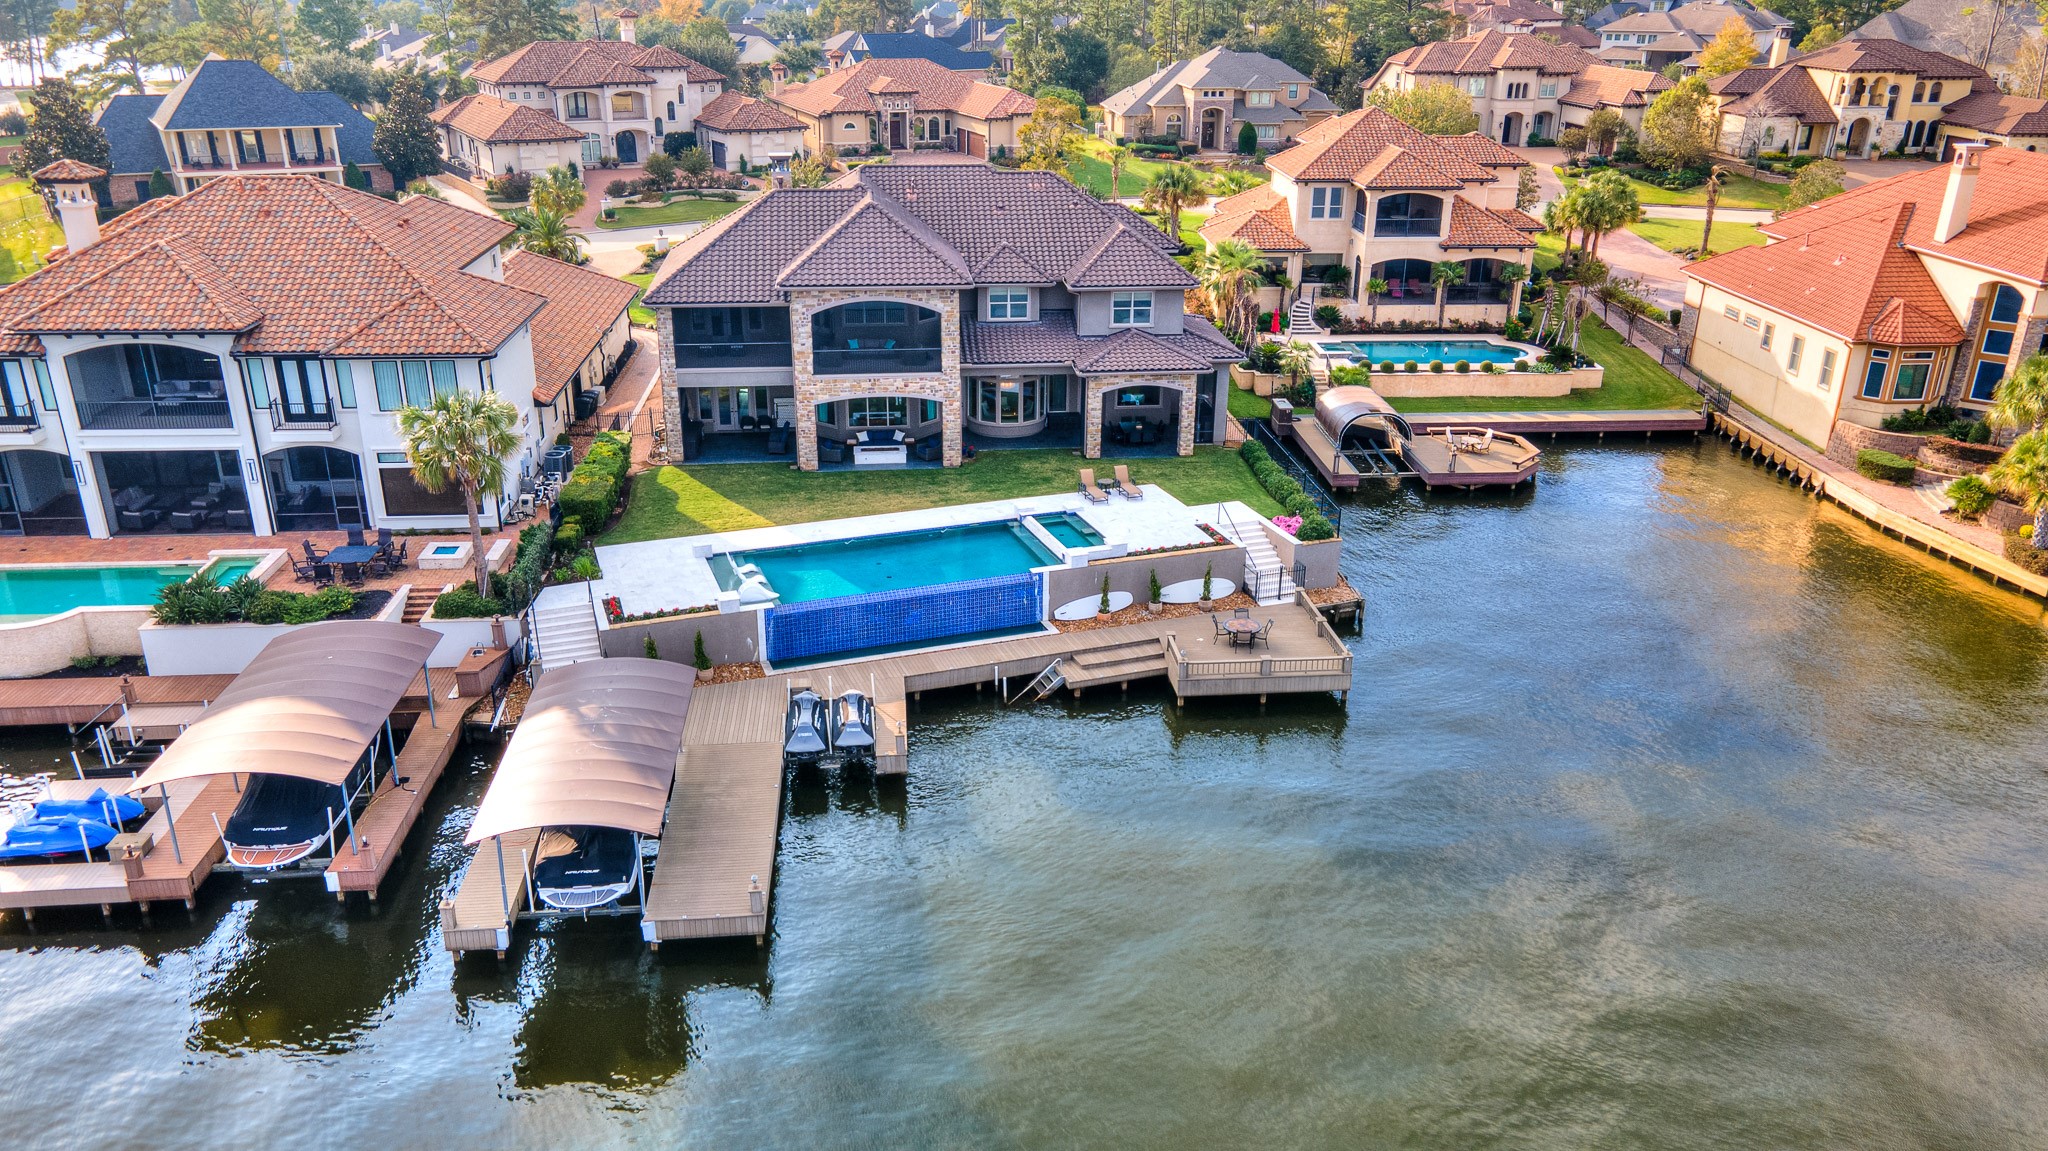 Composite decking for a low maintenance outdoor space expands across 100 feet of bulkhead. Enjoy a dual jet ski lift and boat lift to conveniently store your water toys.